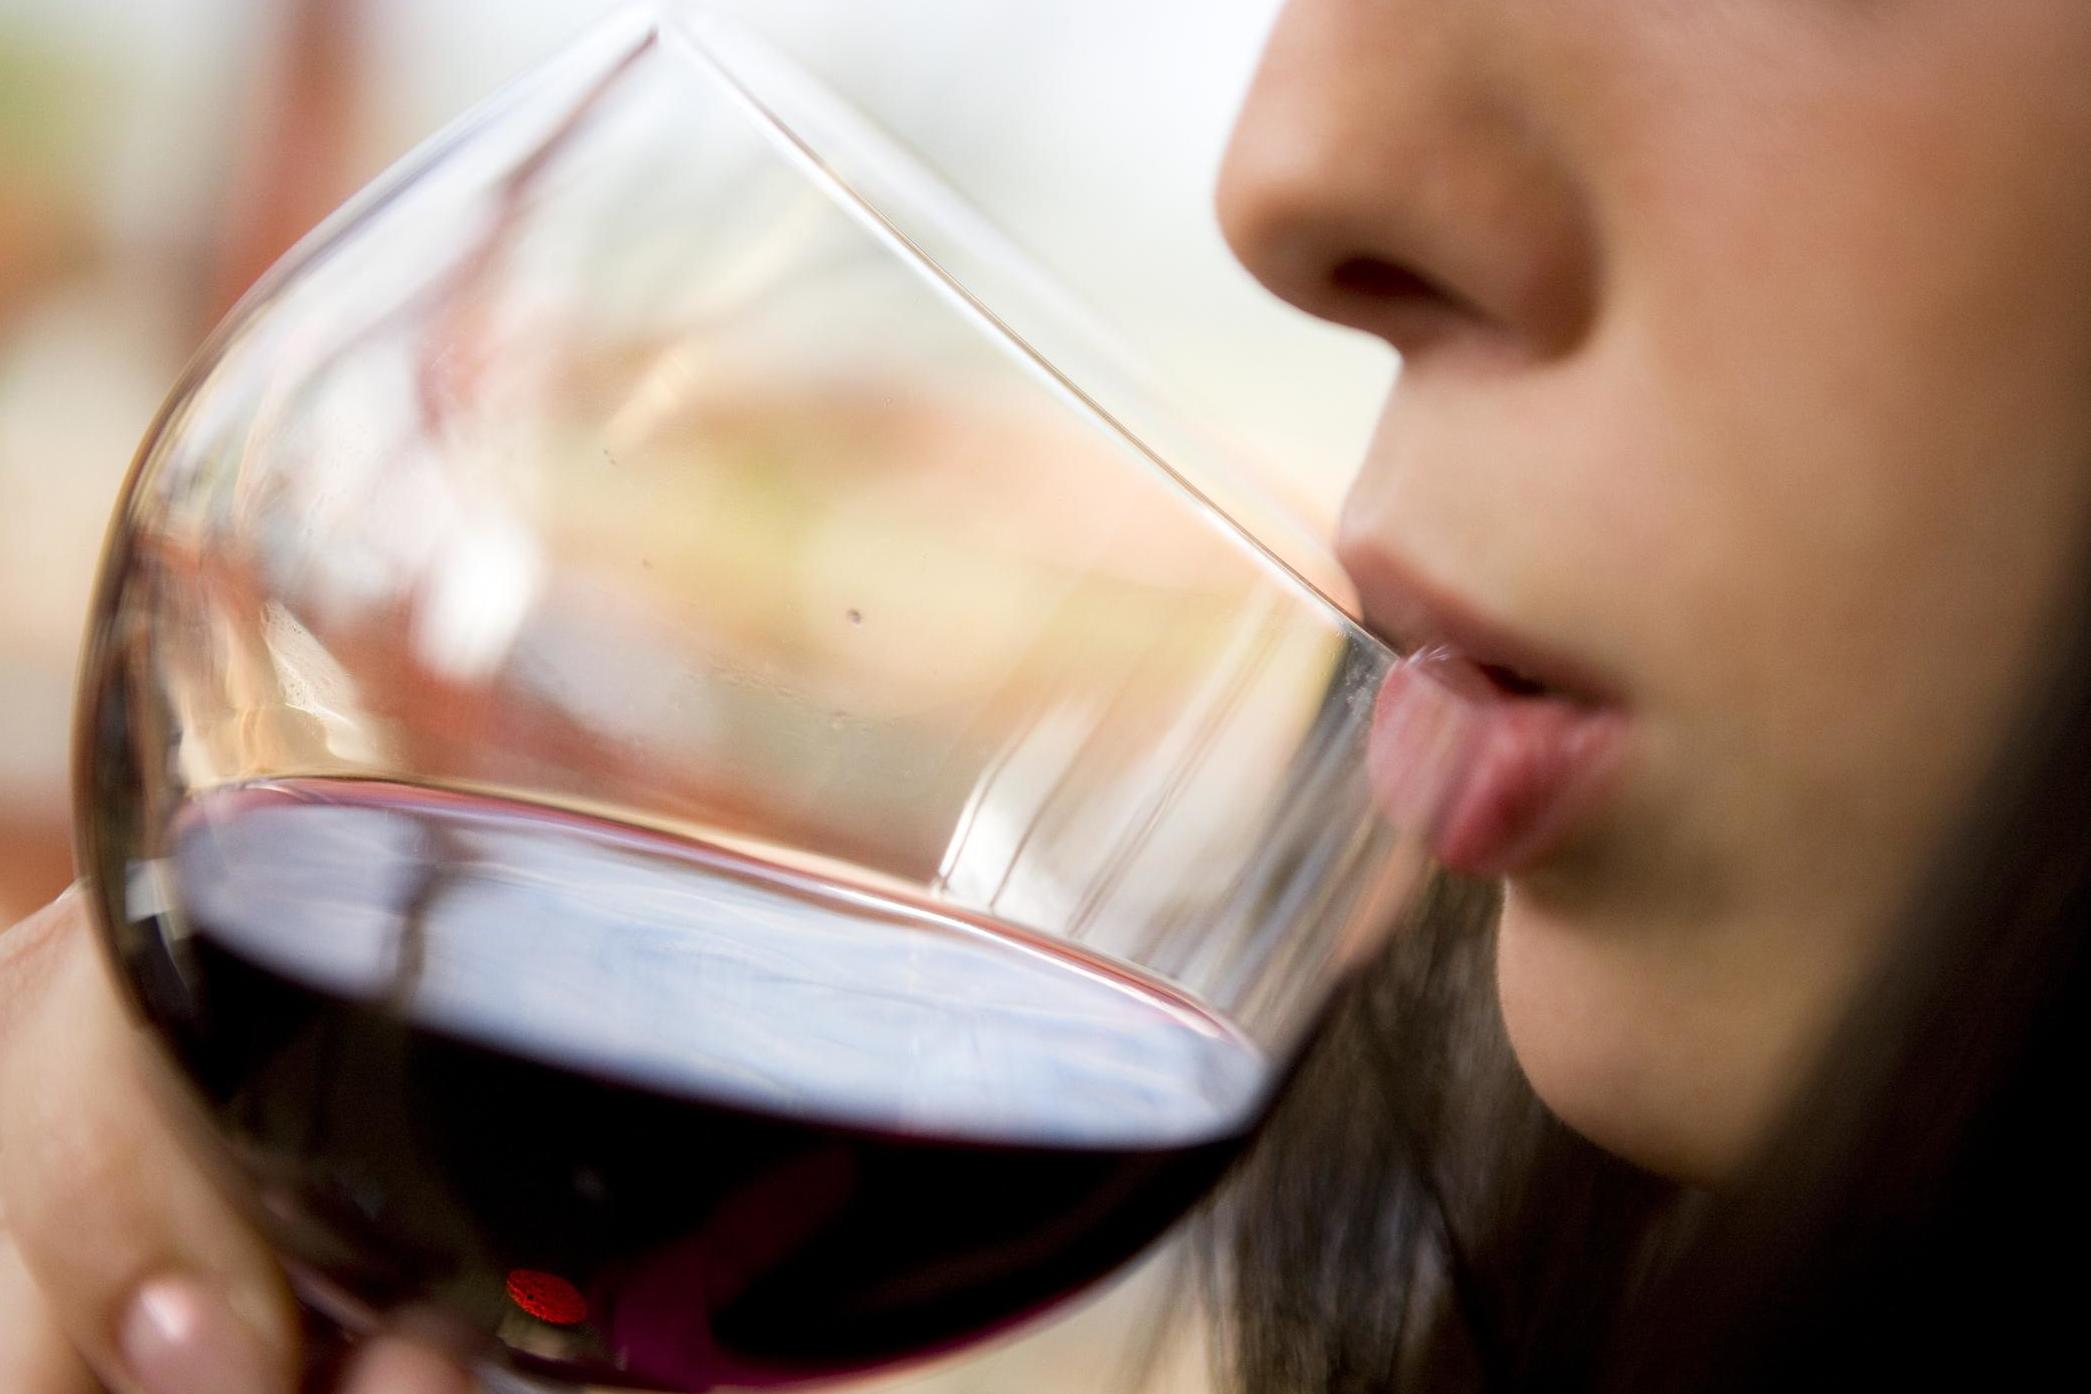 Scientists say we shouldn’t jump to starting our day with a gargle of Merlot quite yet